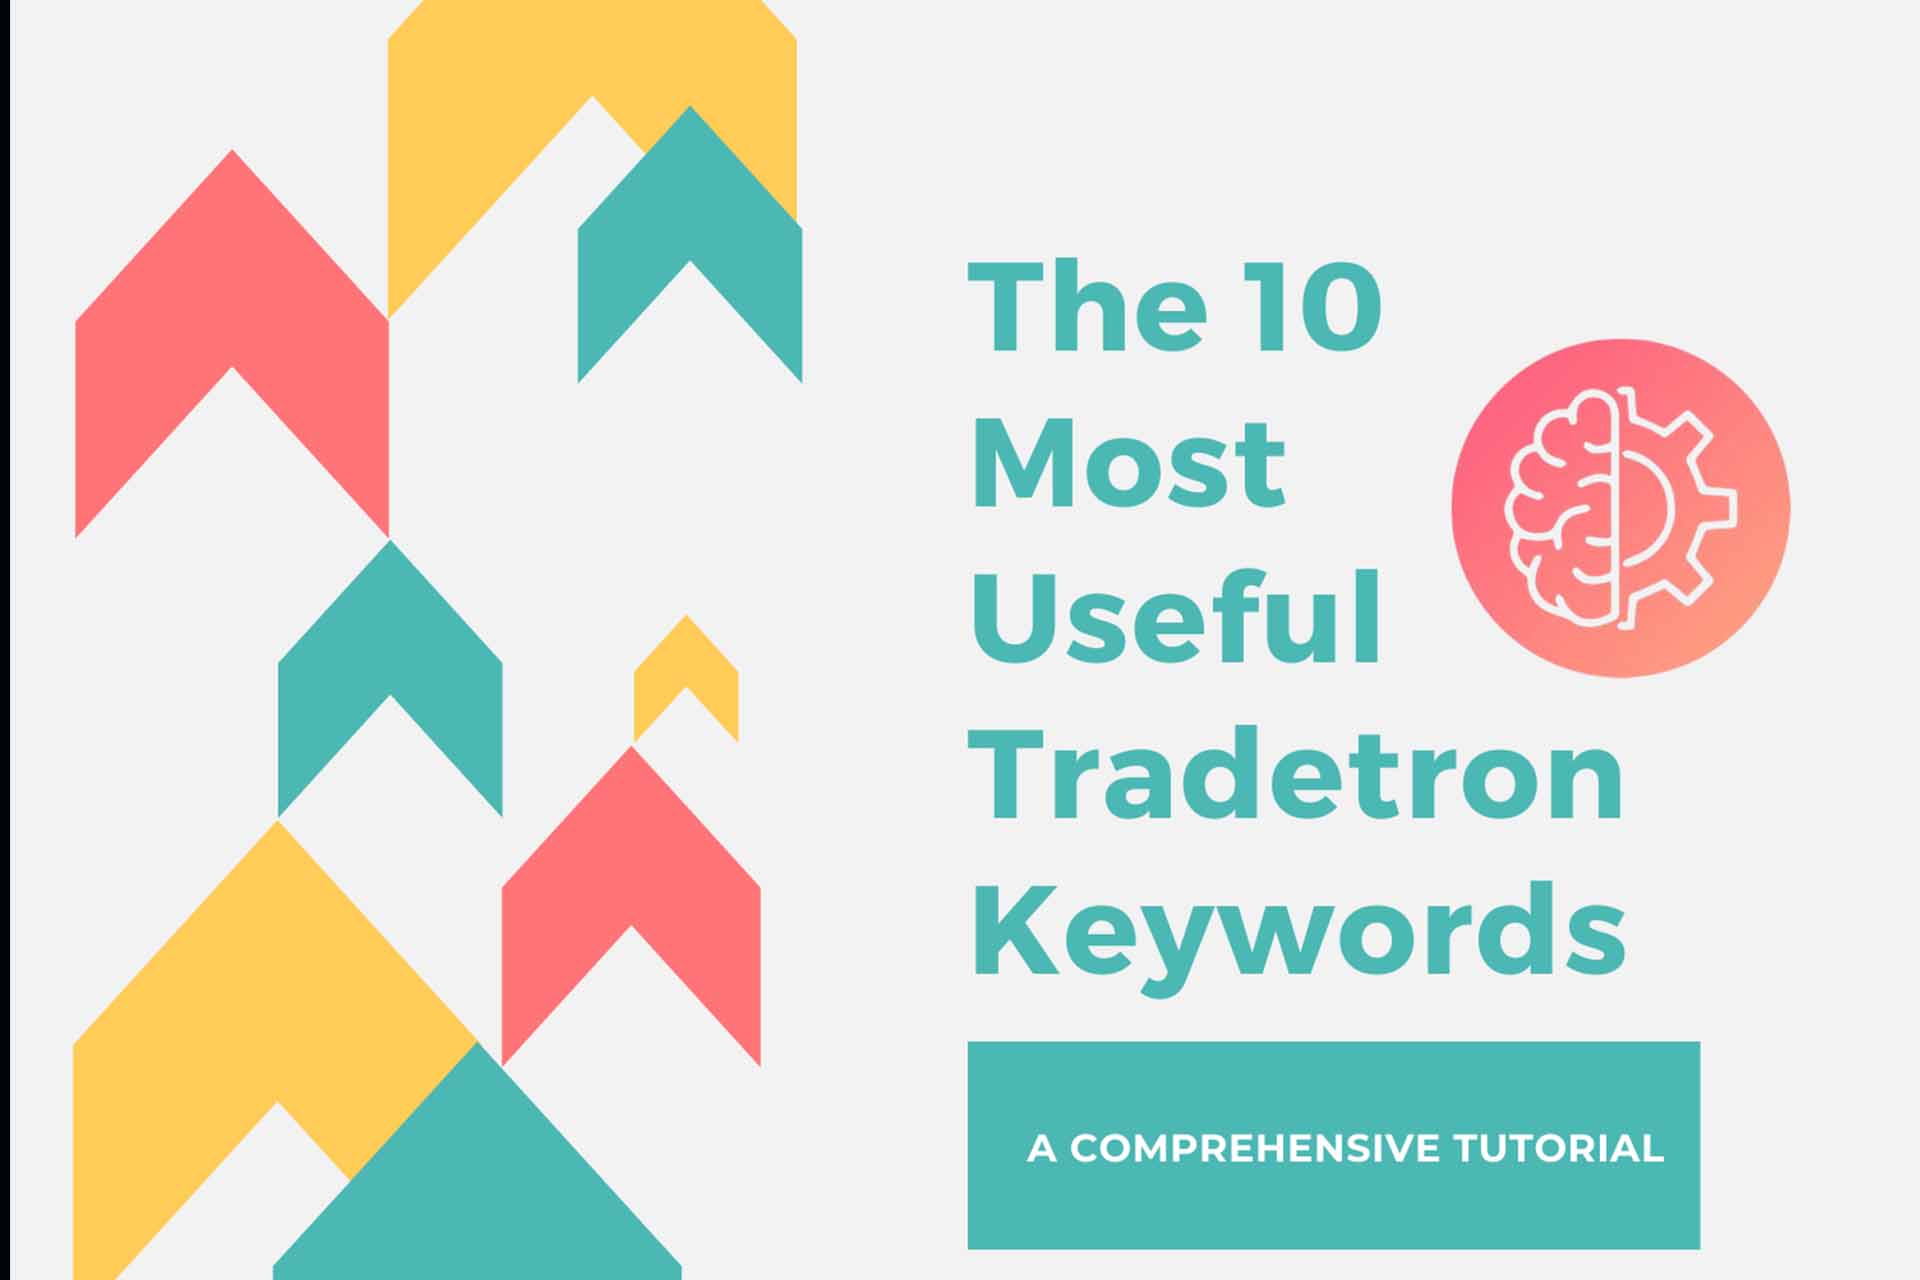 The 10 Most Useful Tradetron Keywords for creating Strategies